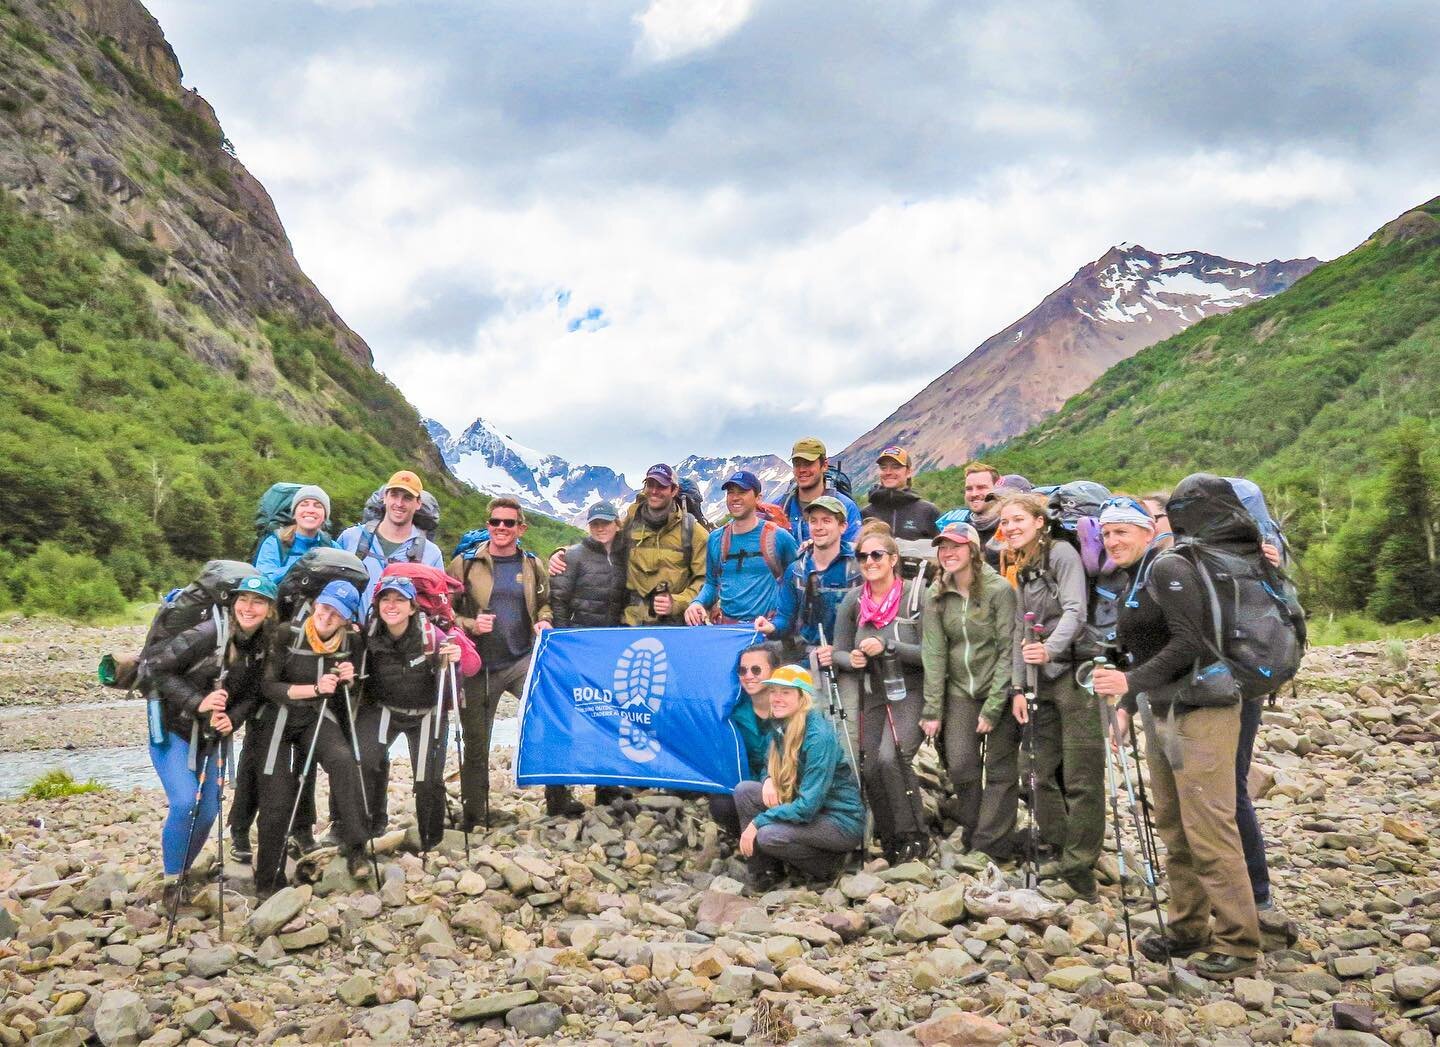 A few highlights from two fantastic expeditions with MBA students from @dukeuniversitybold last week! Really fun to share the early-summer backcountry of @parquepatagonia with these high-energy, curious, kind students. 
📷: @jorgehernanpena